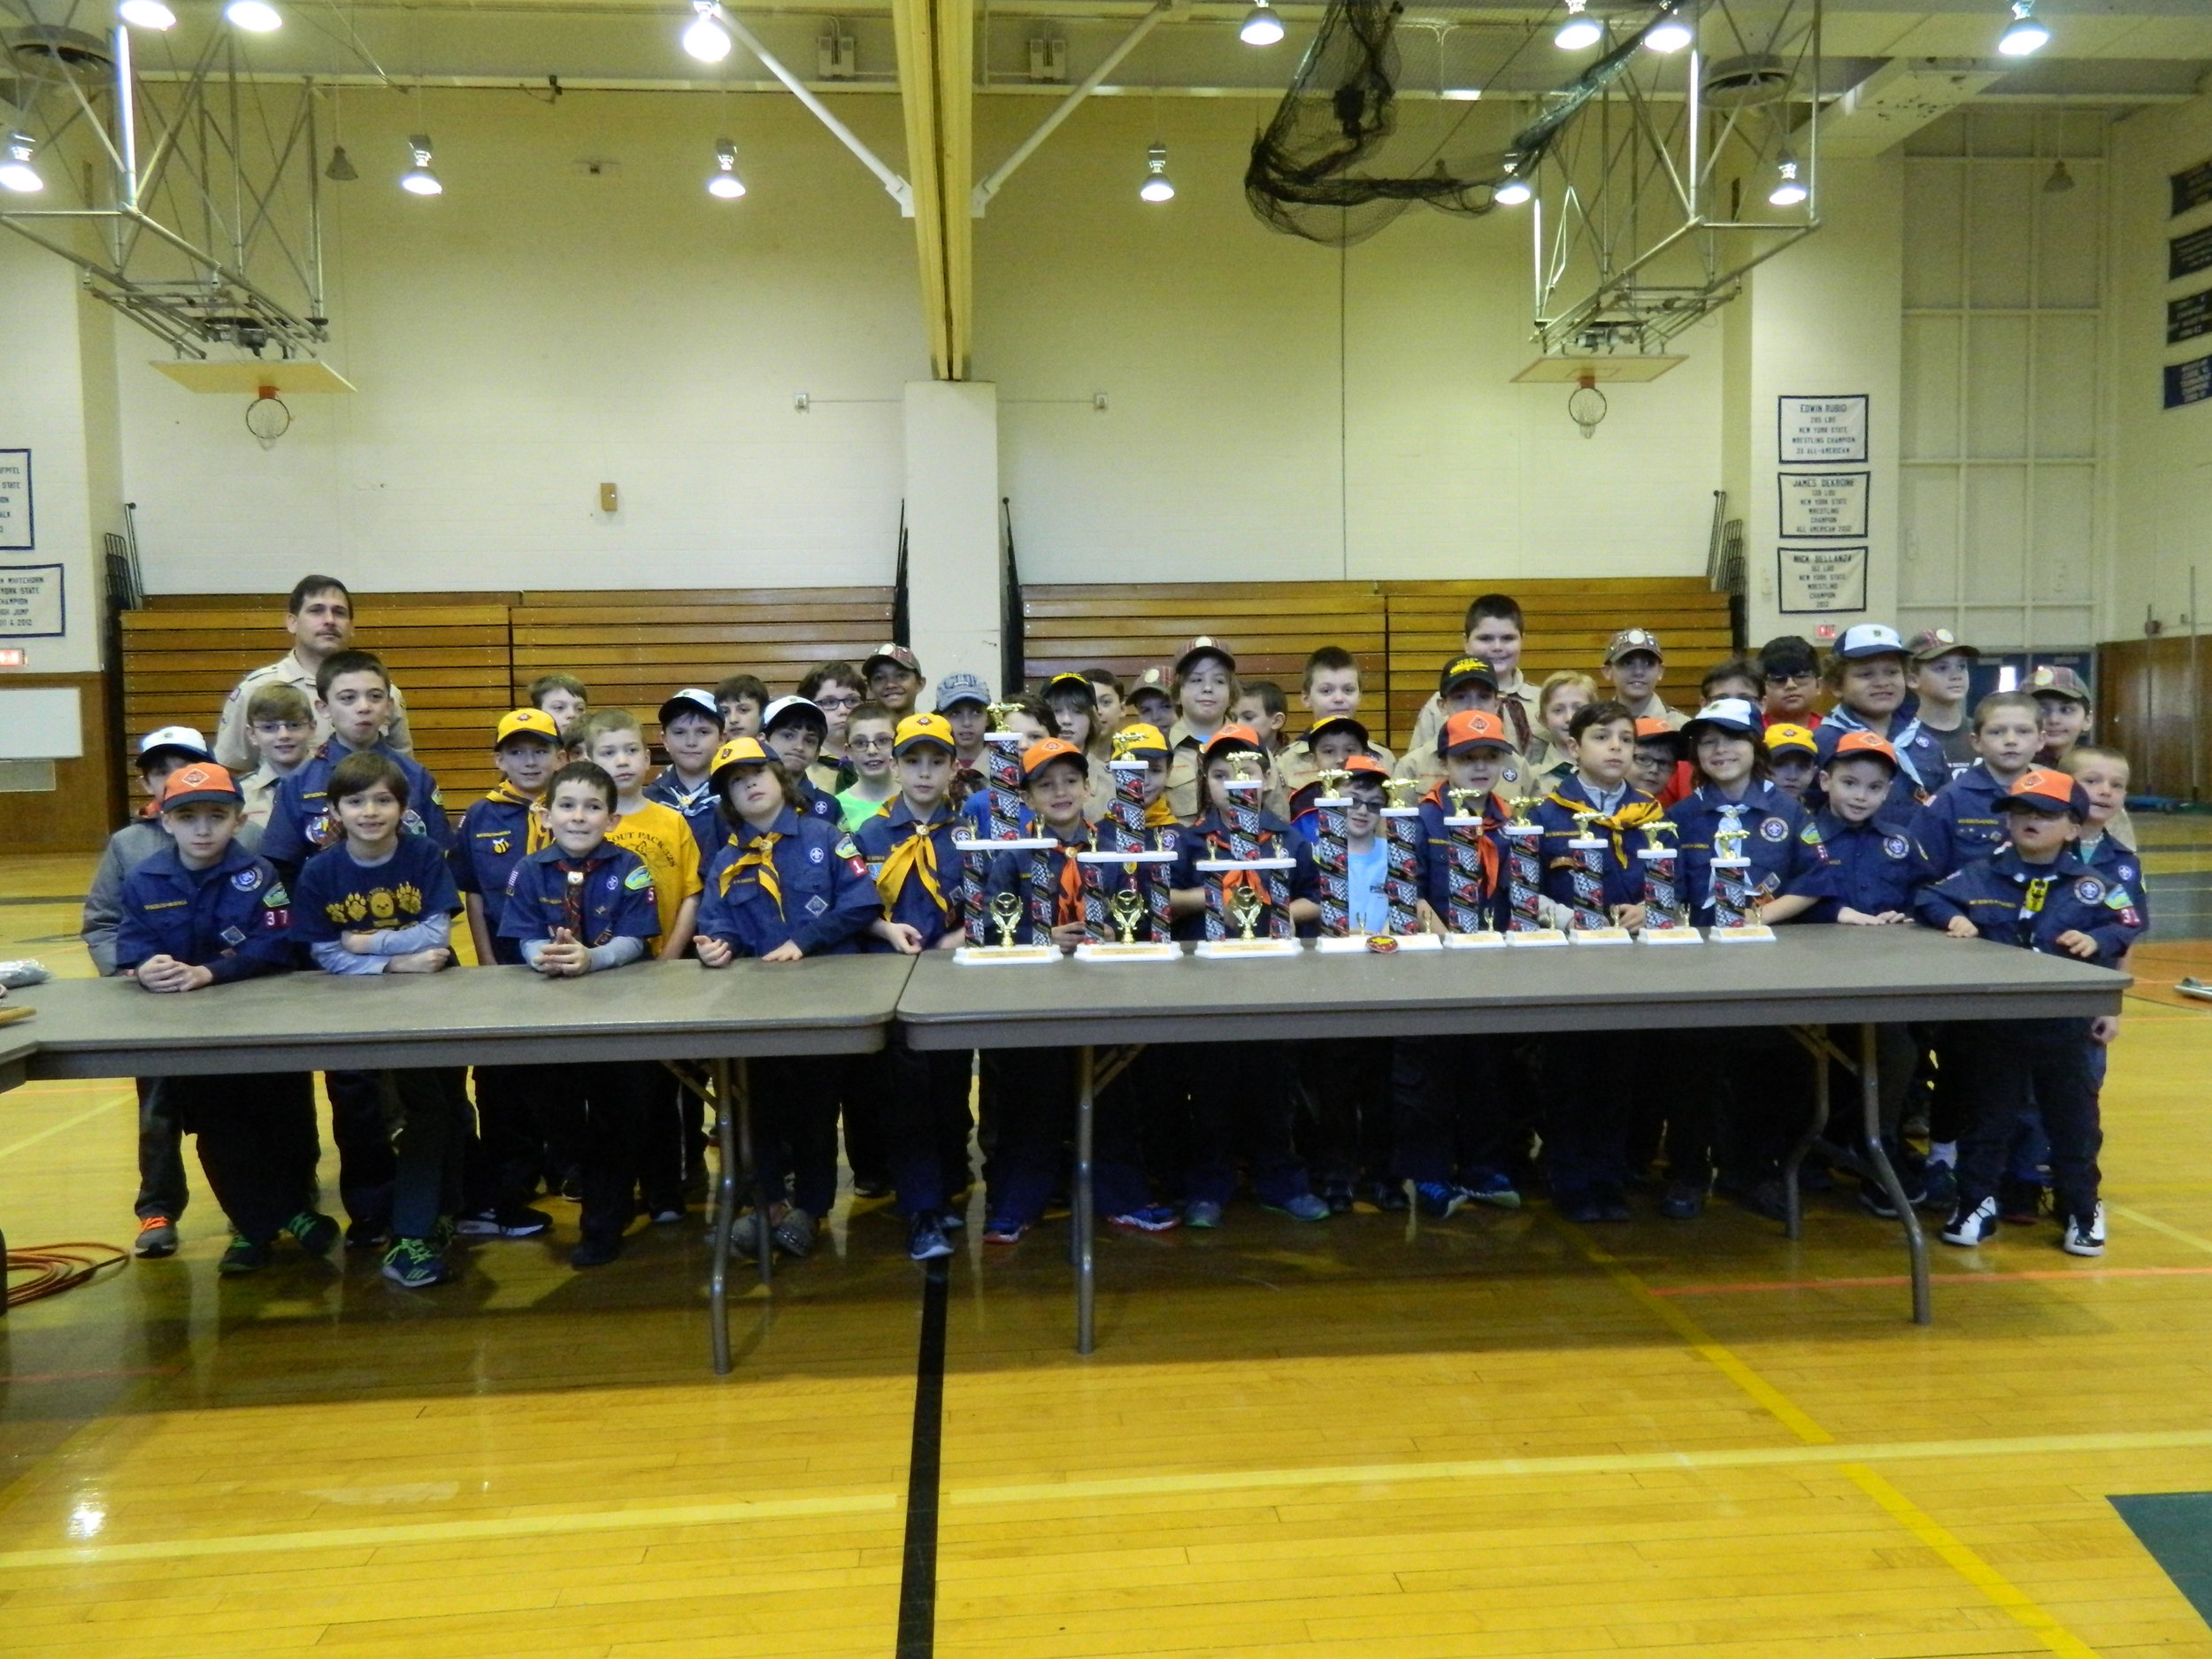  Prior to the start of the Matinecock District’s annual 2017 Pinewood Derby race, all of the participating Tigers, Cubs, and Webelos pose for a photo with the trophies. 